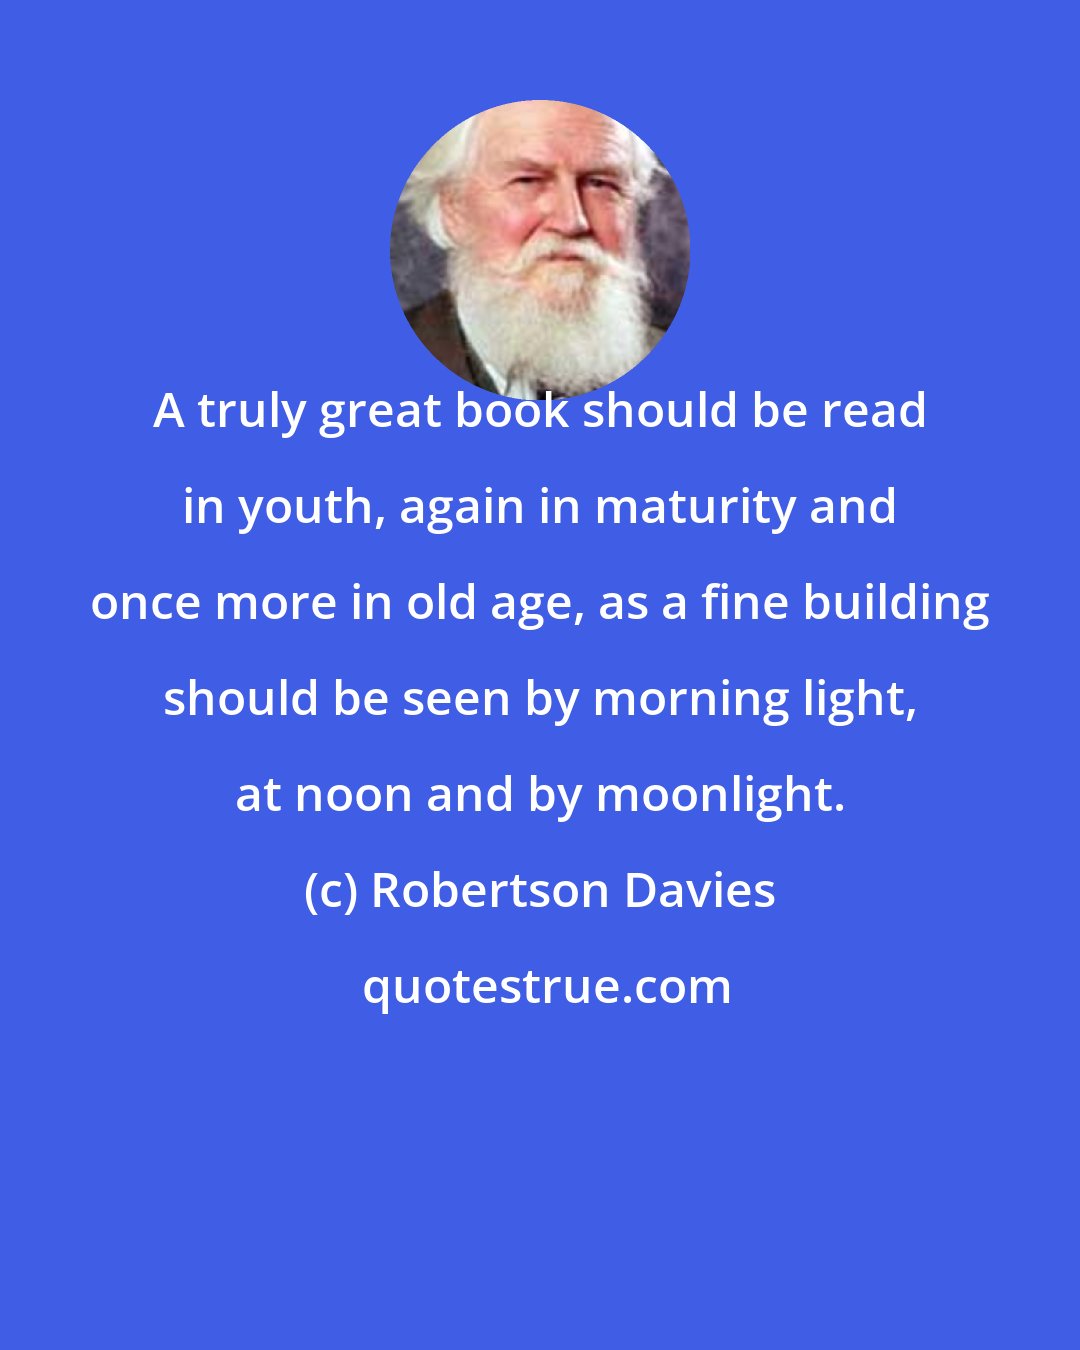 Robertson Davies: A truly great book should be read in youth, again in maturity and once more in old age, as a fine building should be seen by morning light, at noon and by moonlight.